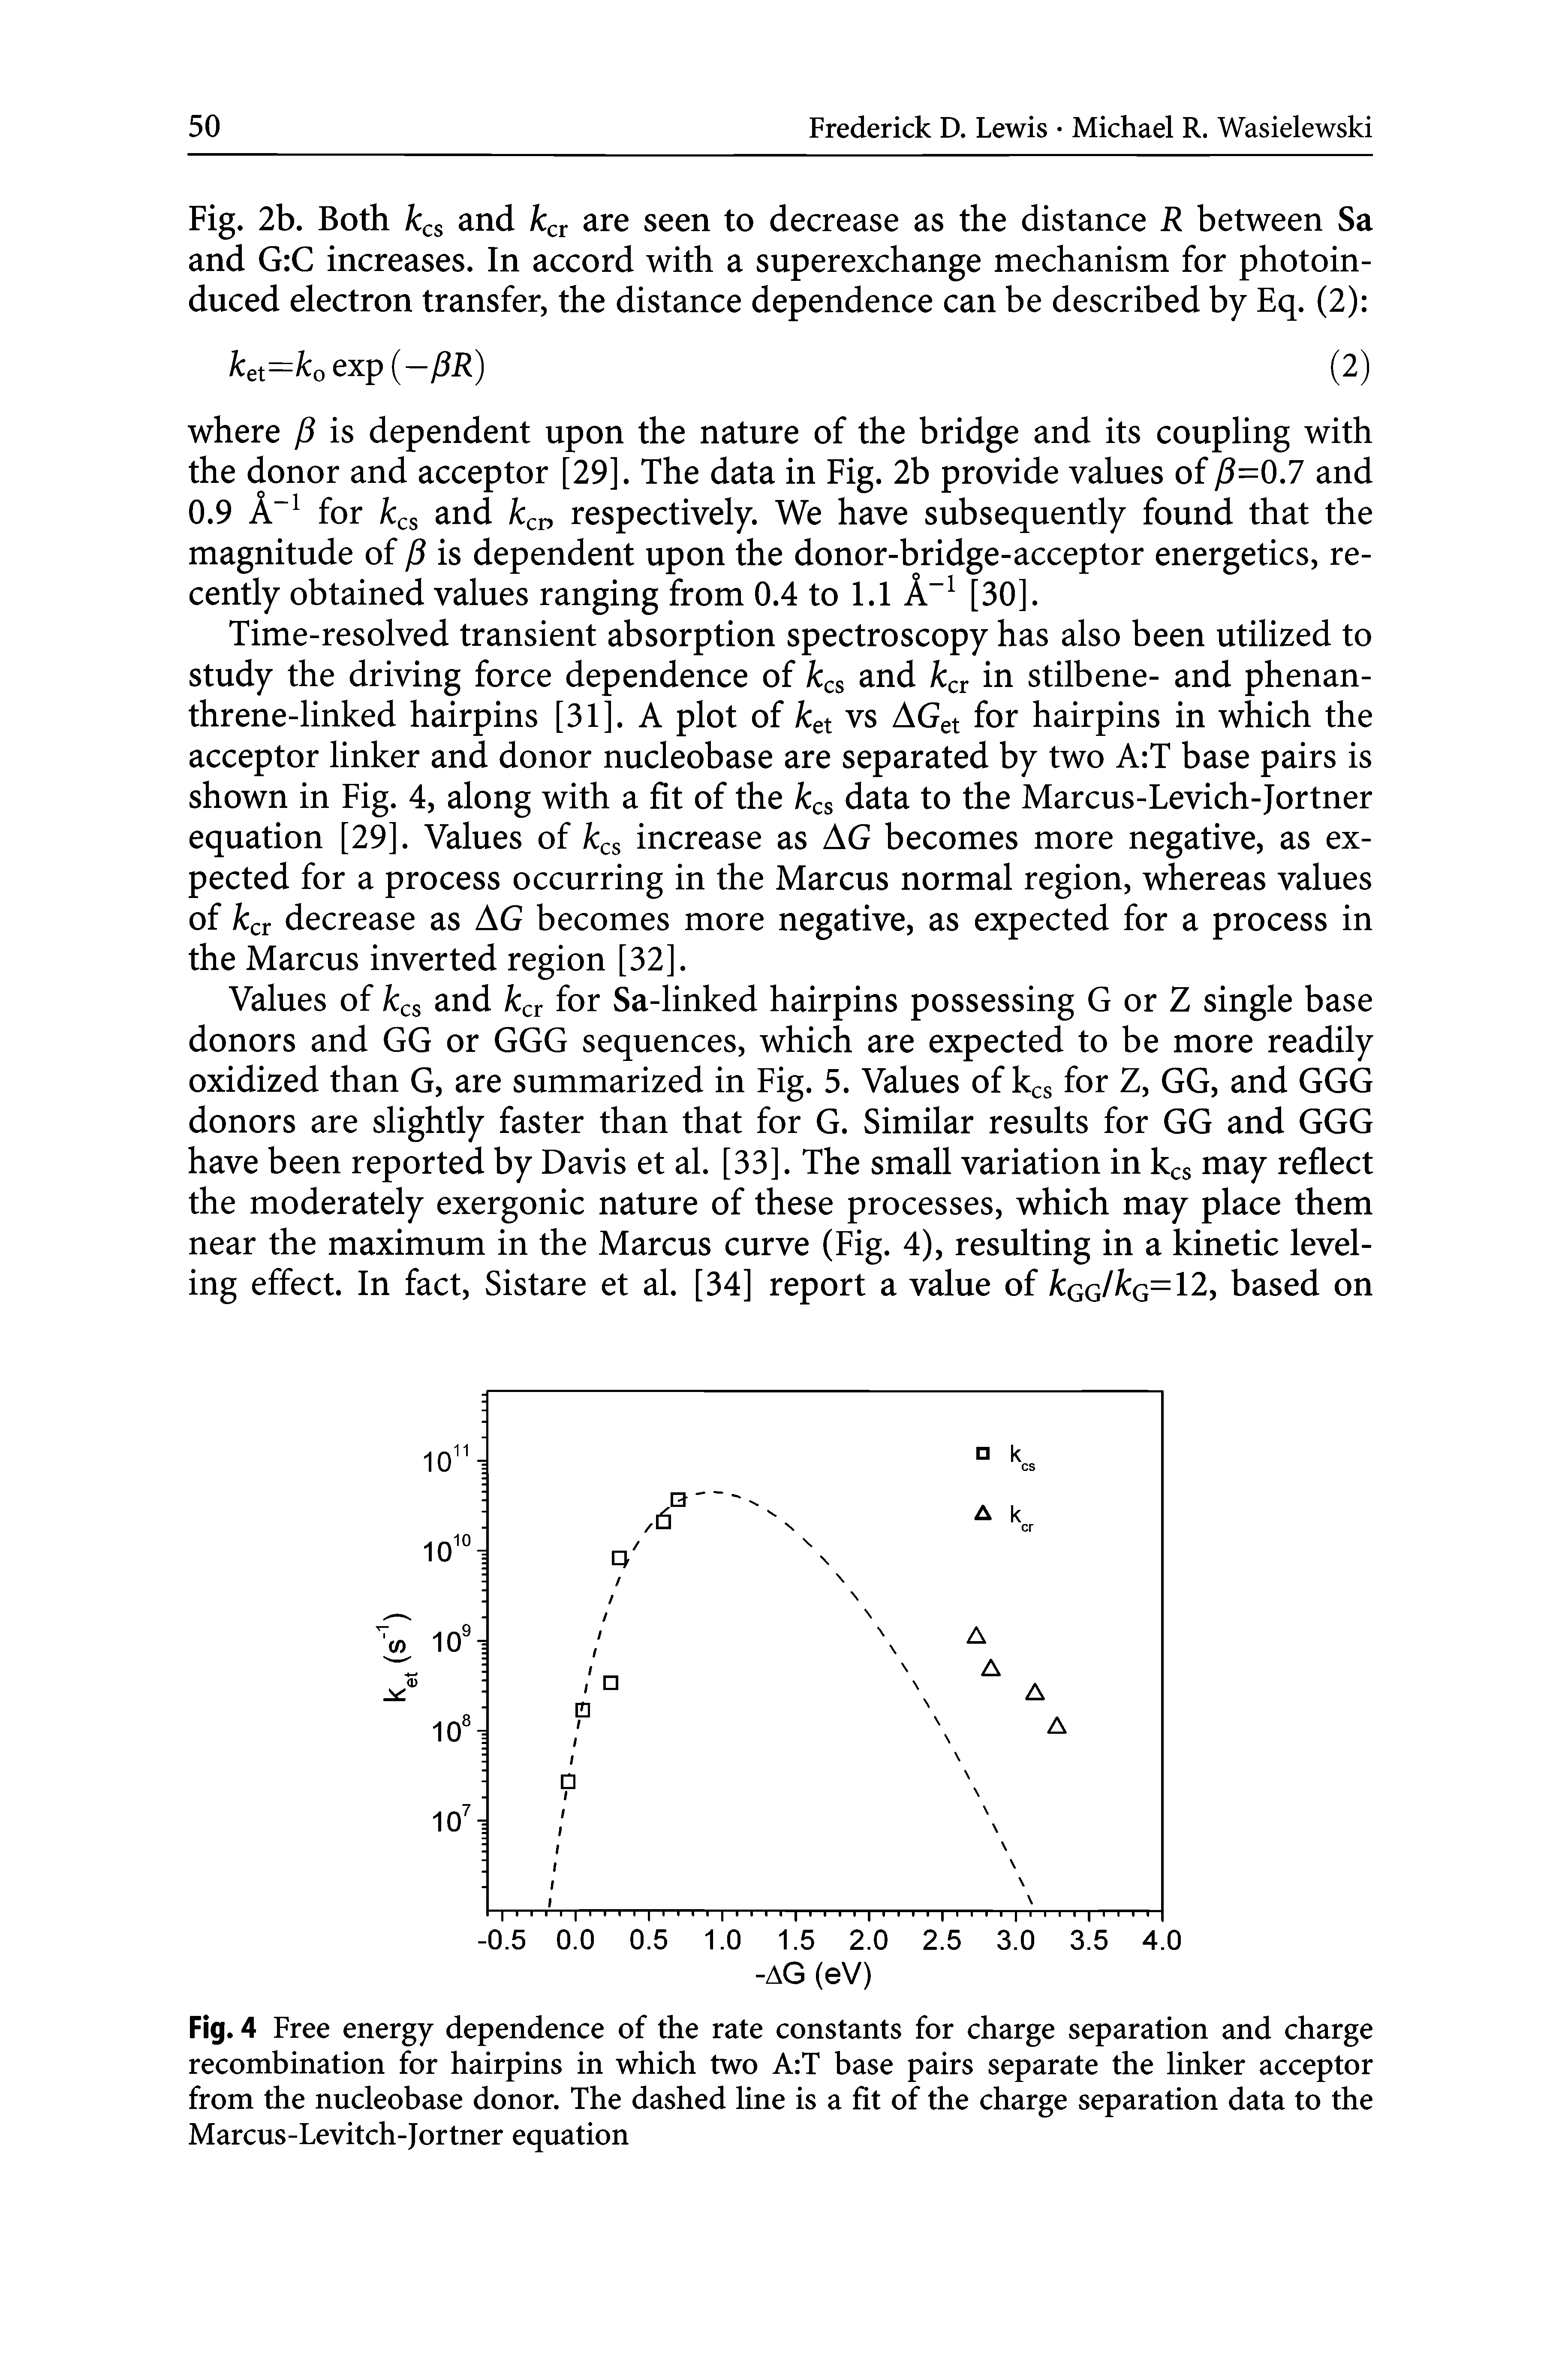 Fig. 4 Free energy dependence of the rate constants for charge separation and charge recombination for hairpins in which two A T base pairs separate the linker acceptor from the nucleobase donor. The dashed line is a fit of the charge separation data to the Marcus-Levitch-Jortner equation...